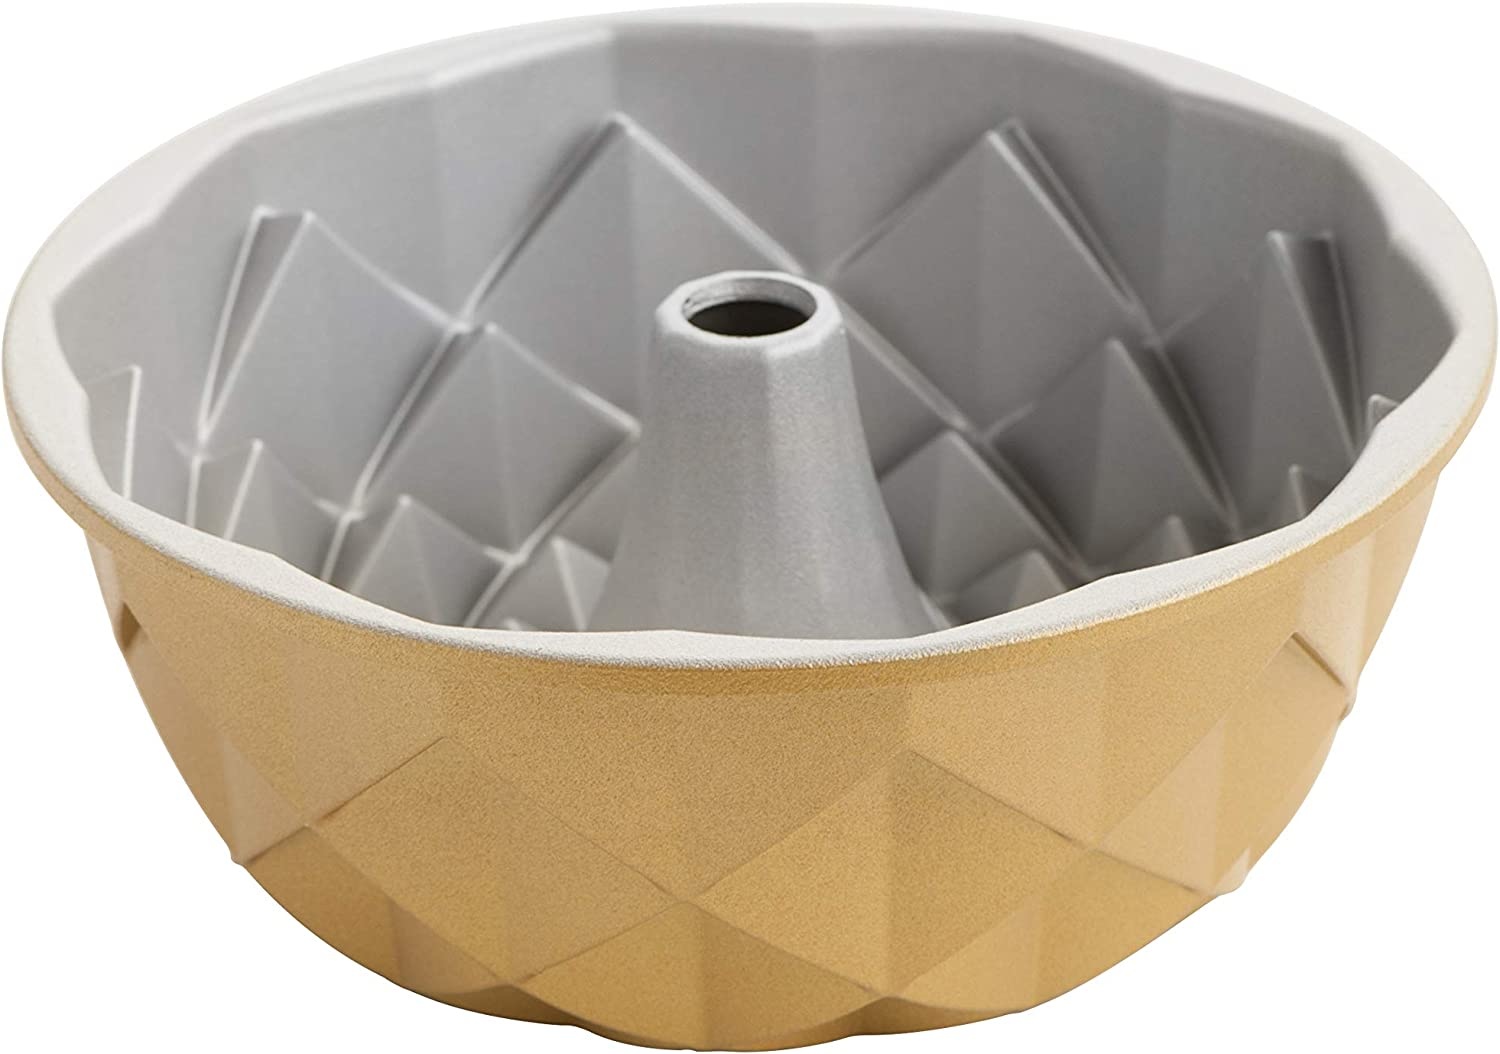 Nordic Ware Bundt cake mold 10 cups Jubilee ''Gold'' - Ares Kitchen and  Baking Supplies